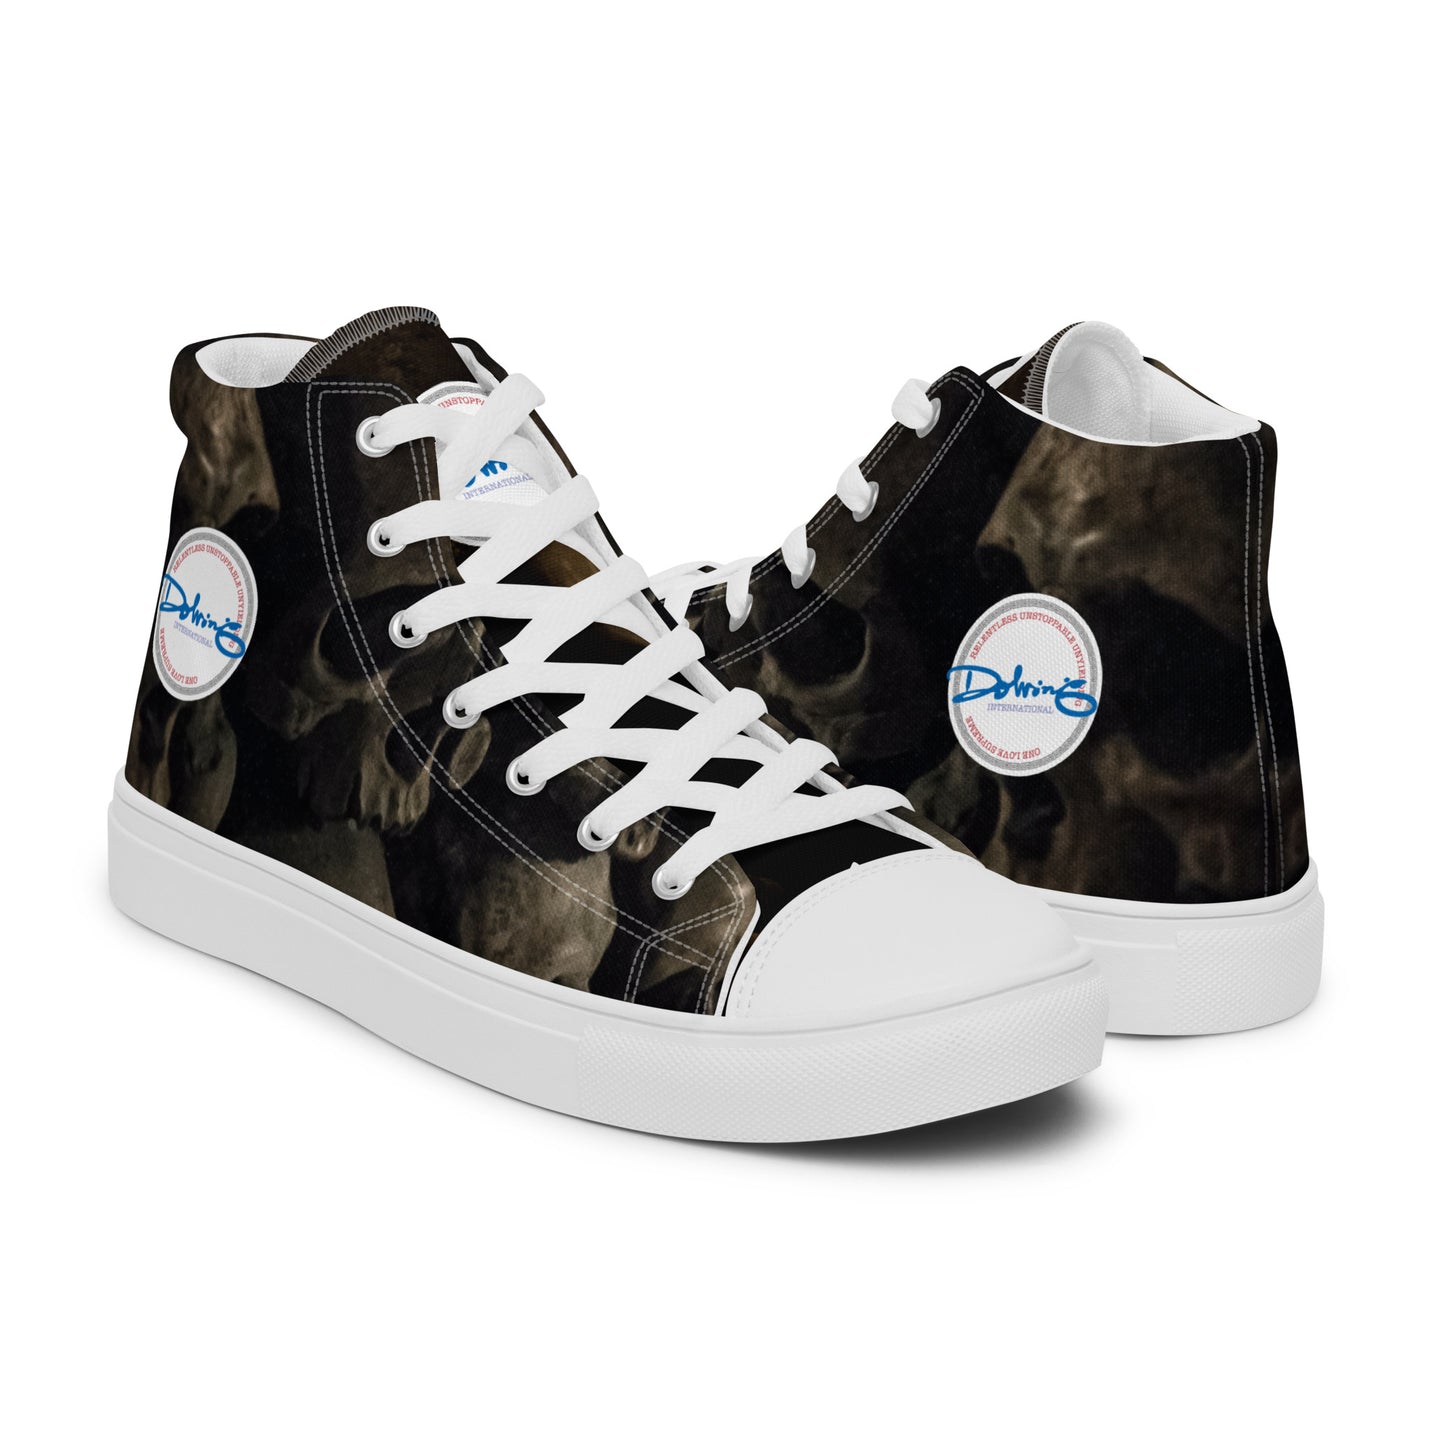 SKULLS by DOLVING - Men’s high top canvas shoes